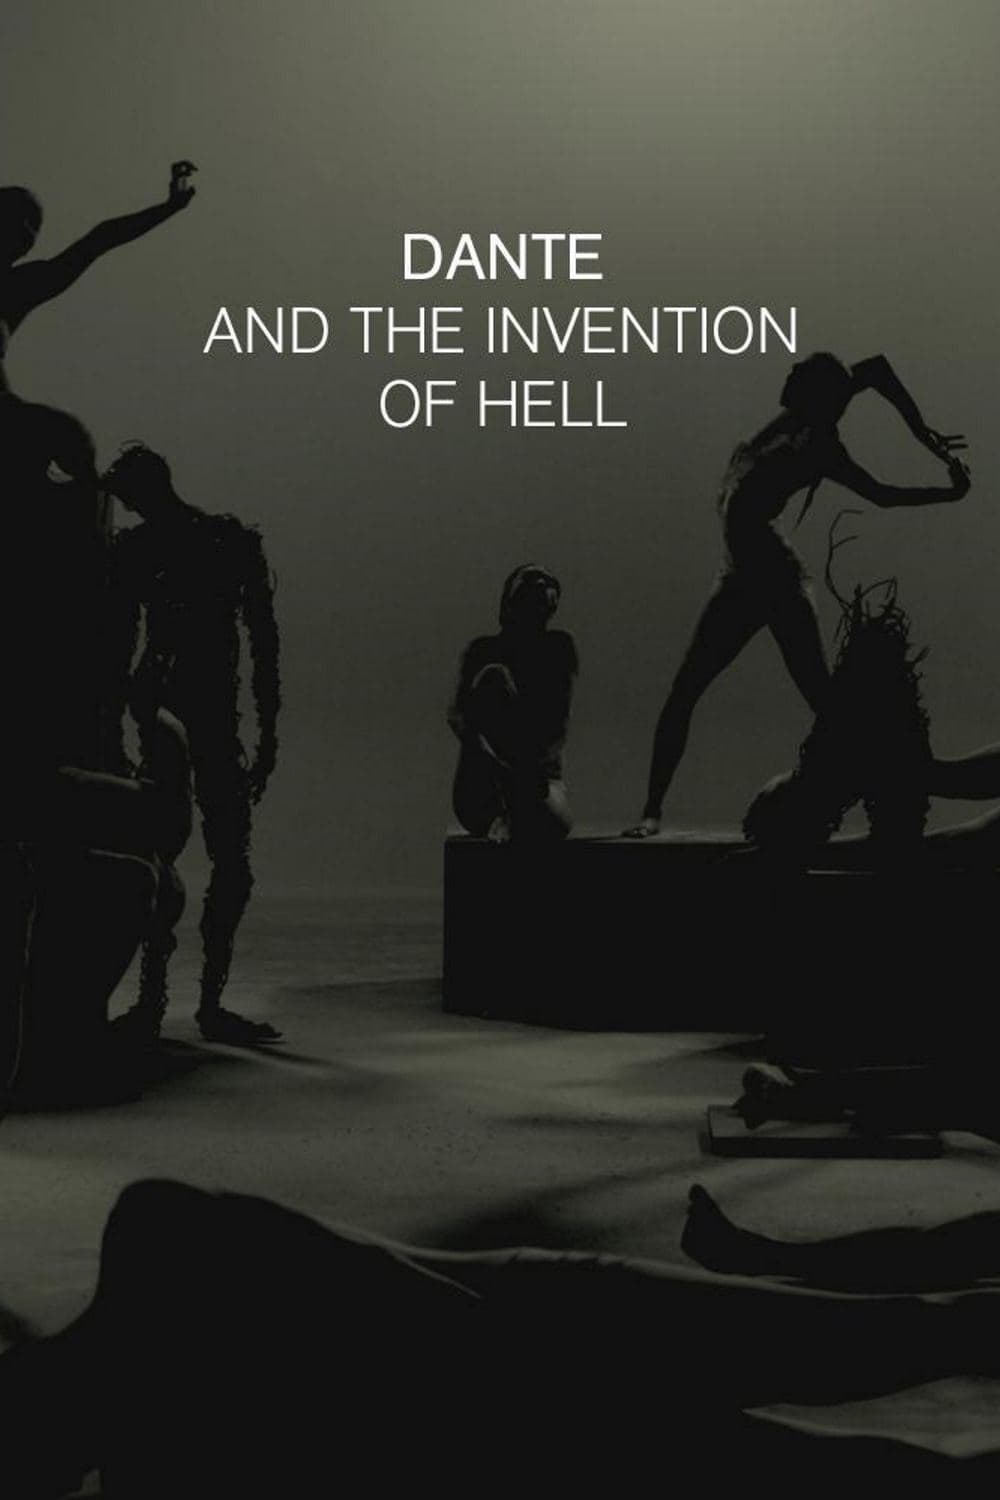 Dante and the Invention of Hell